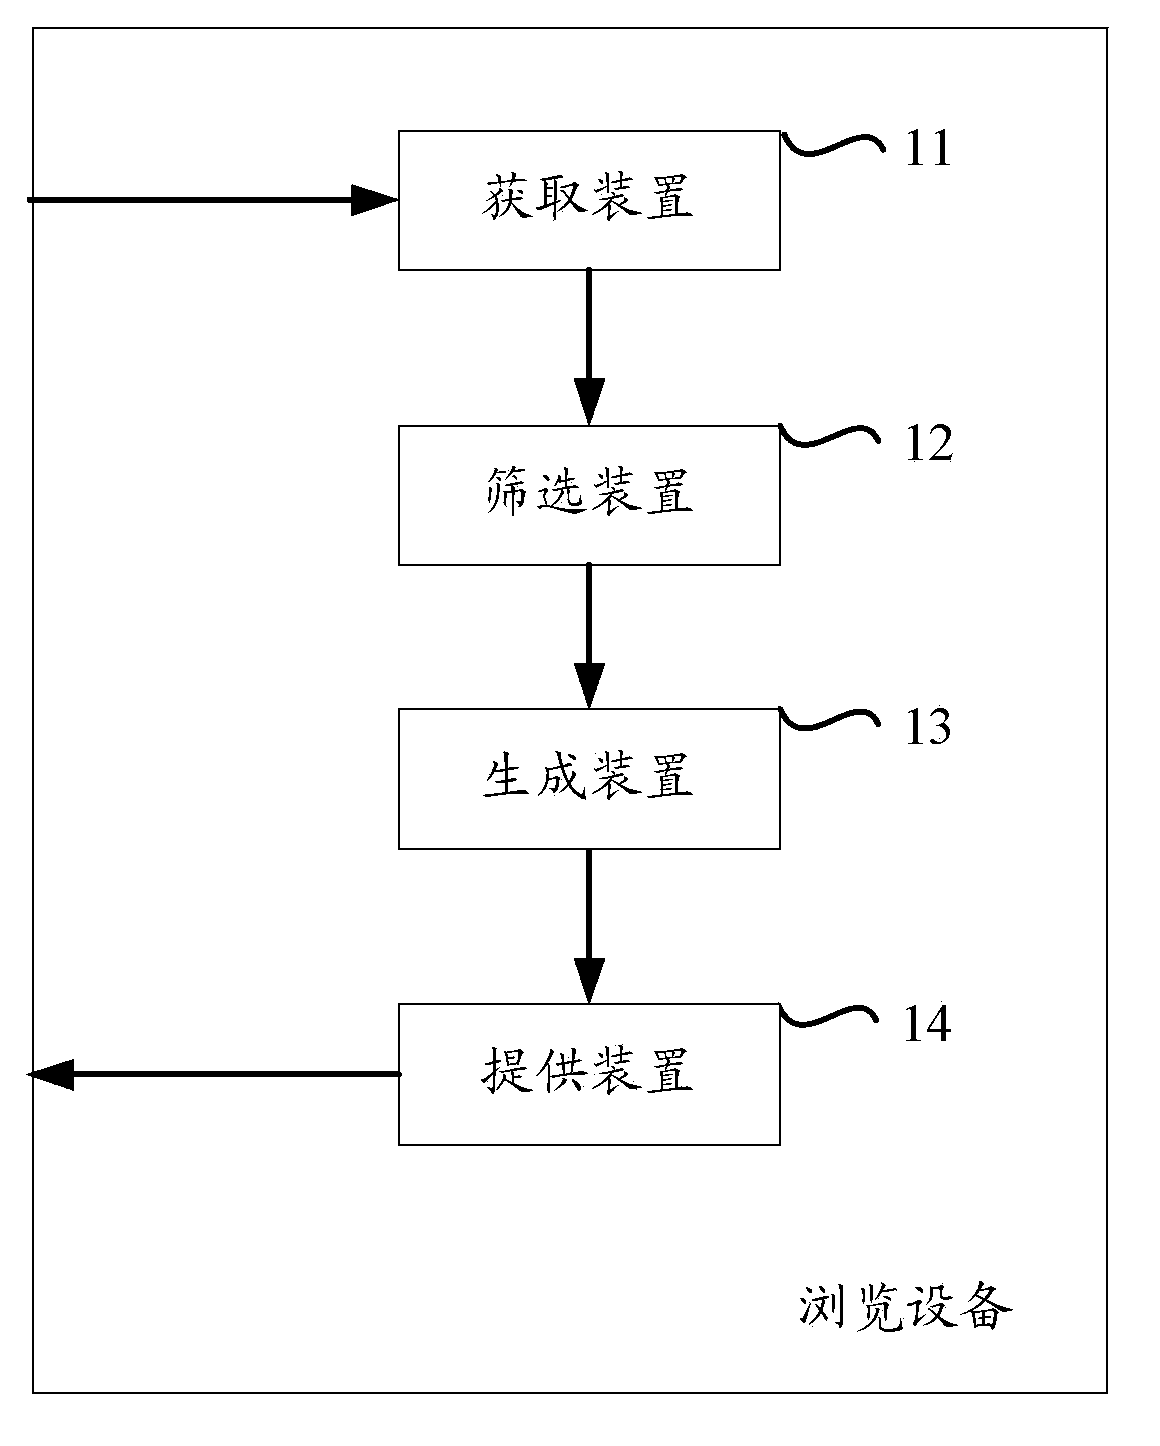 Method and device for providing browsing information based on search result